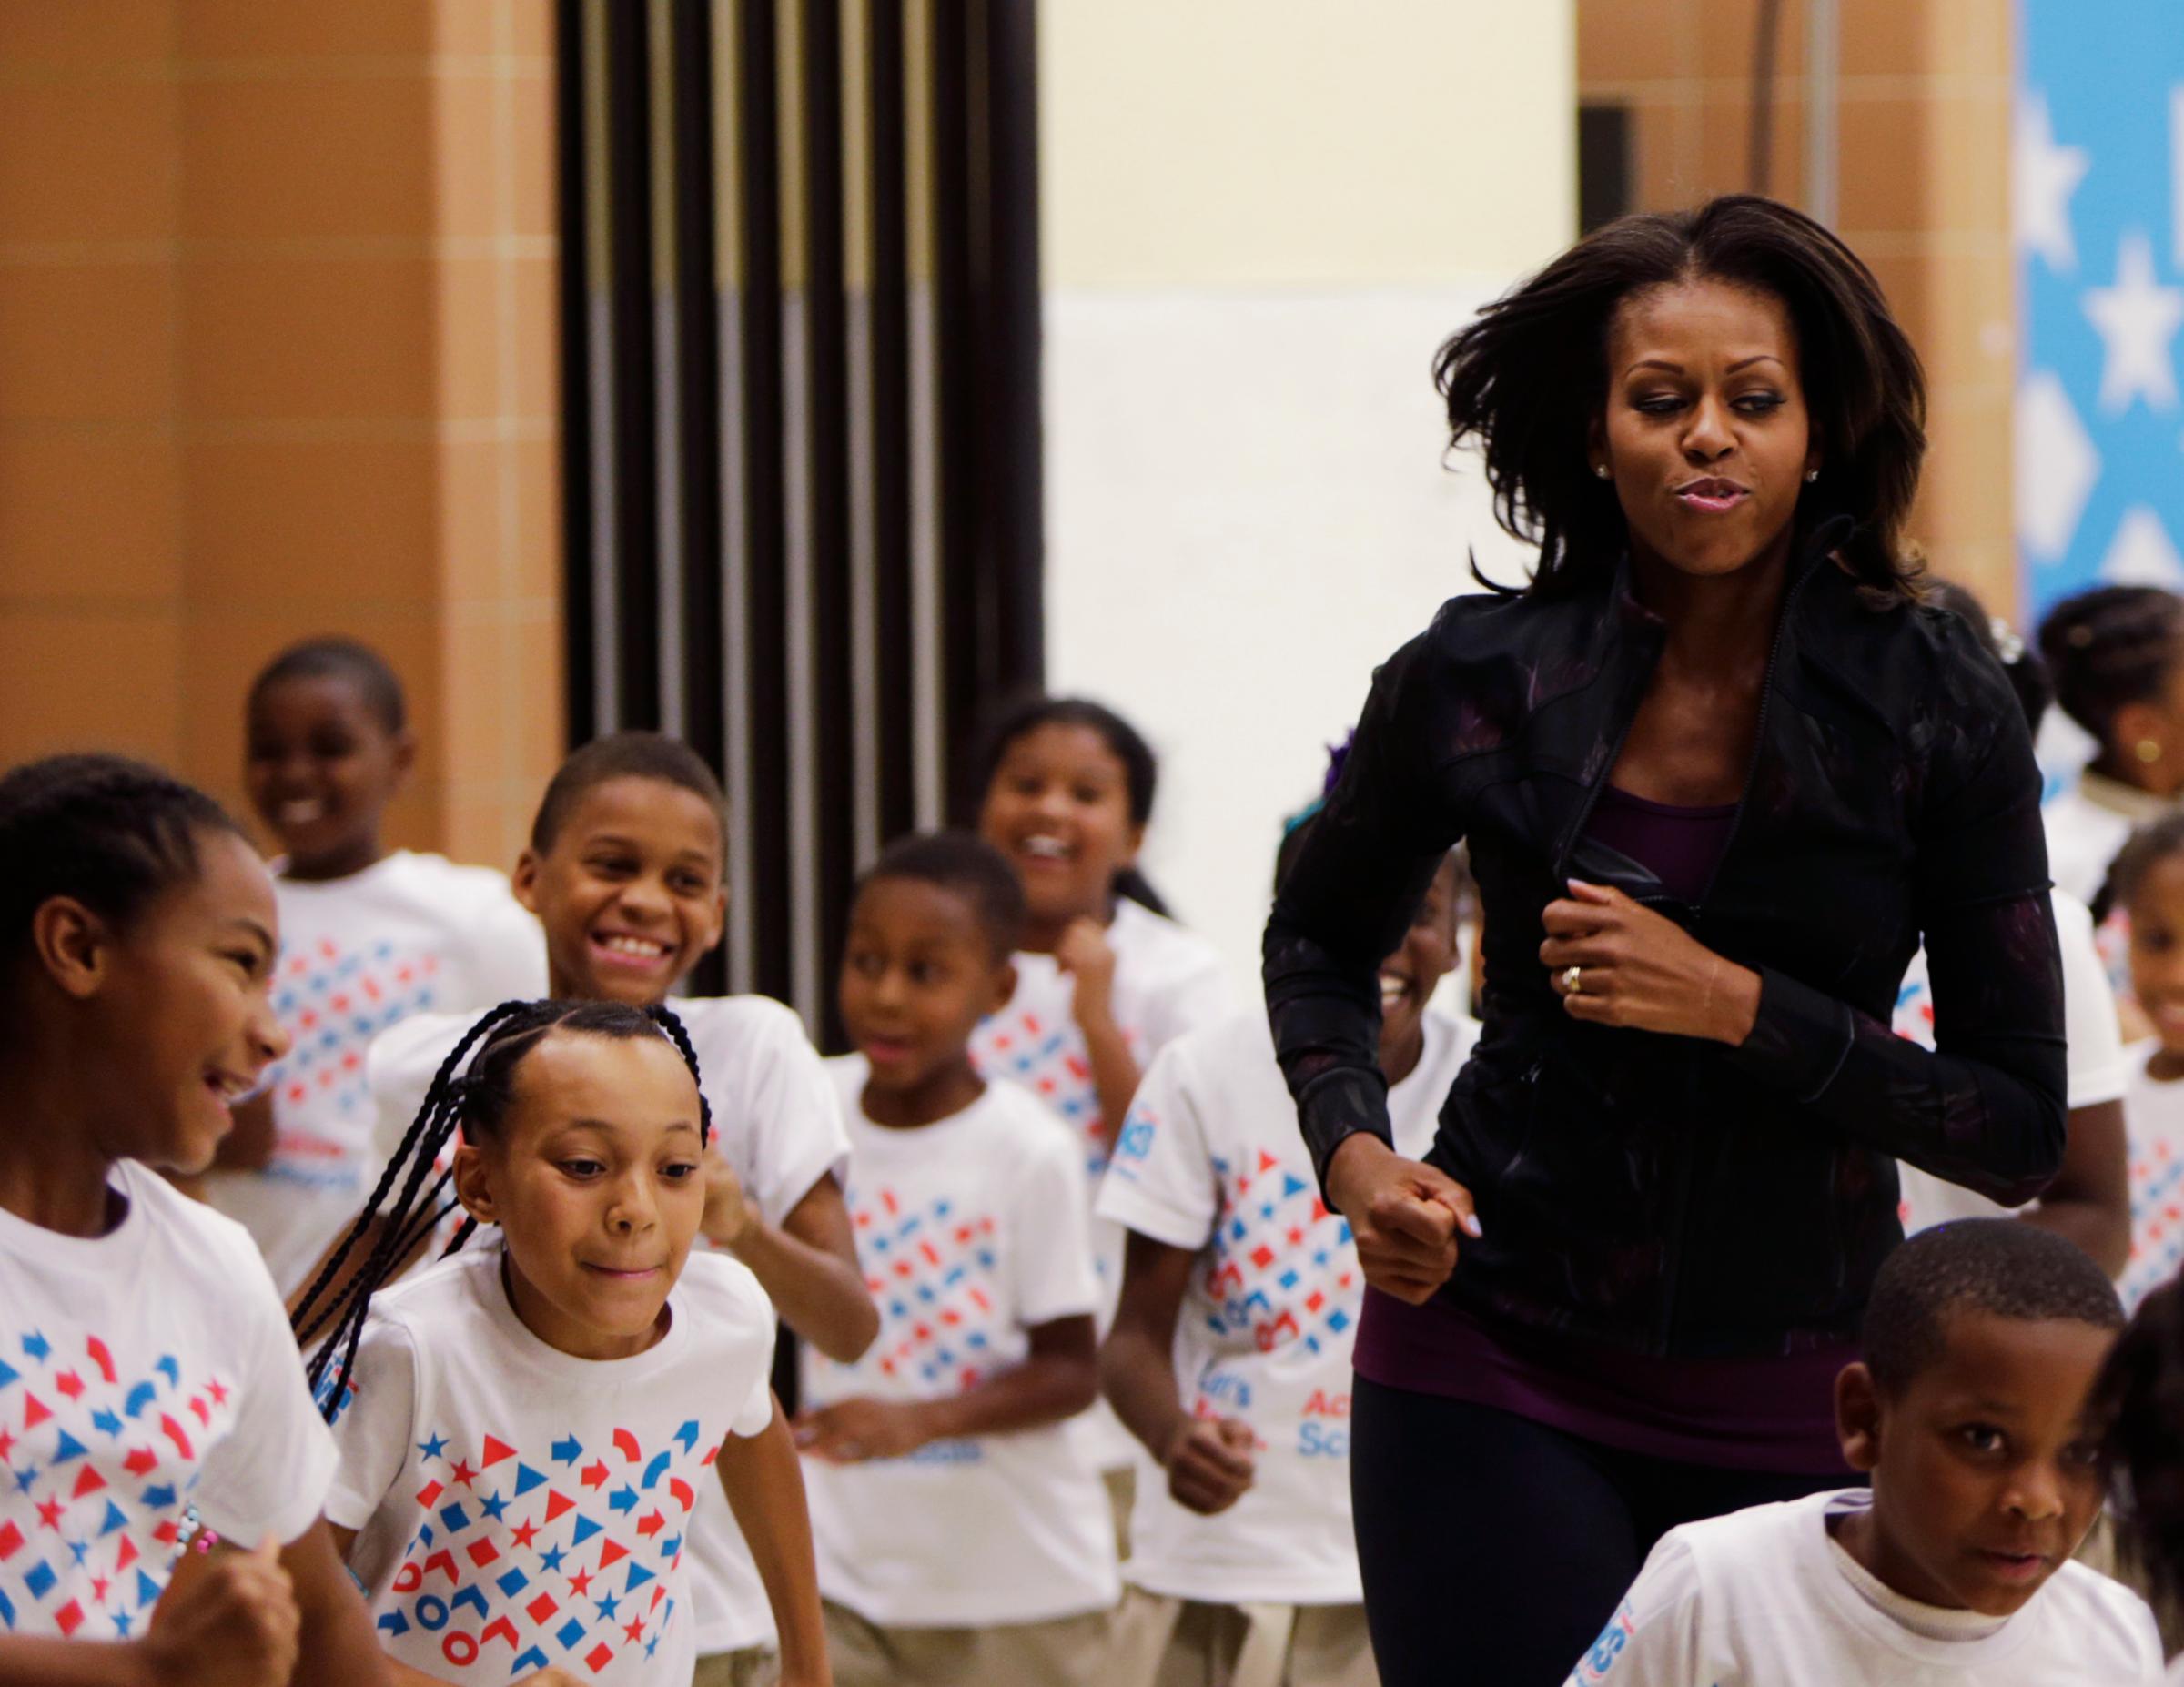 U.S. First Lady Obama jogs with children at a back-to-school event in Washington